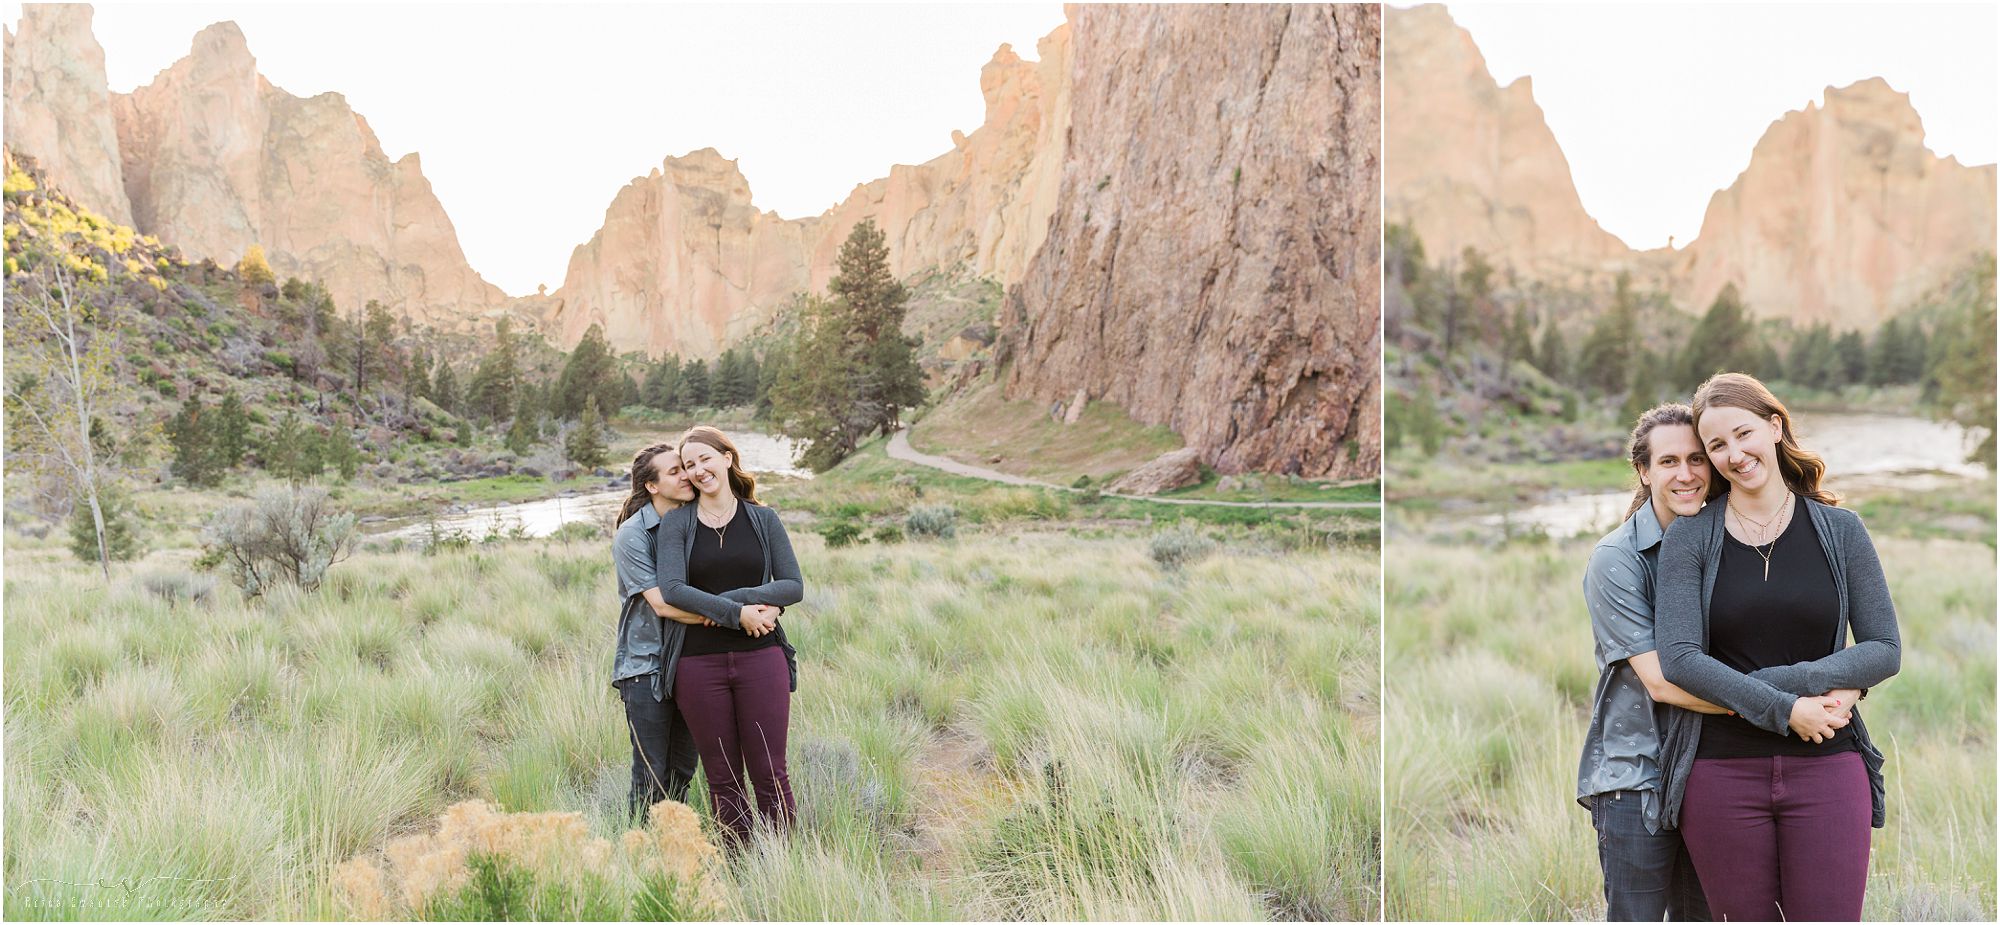 A beautiful engagement session featuring the red rocks of Smith Rock State Park in OR. | Erica Swantek Photography